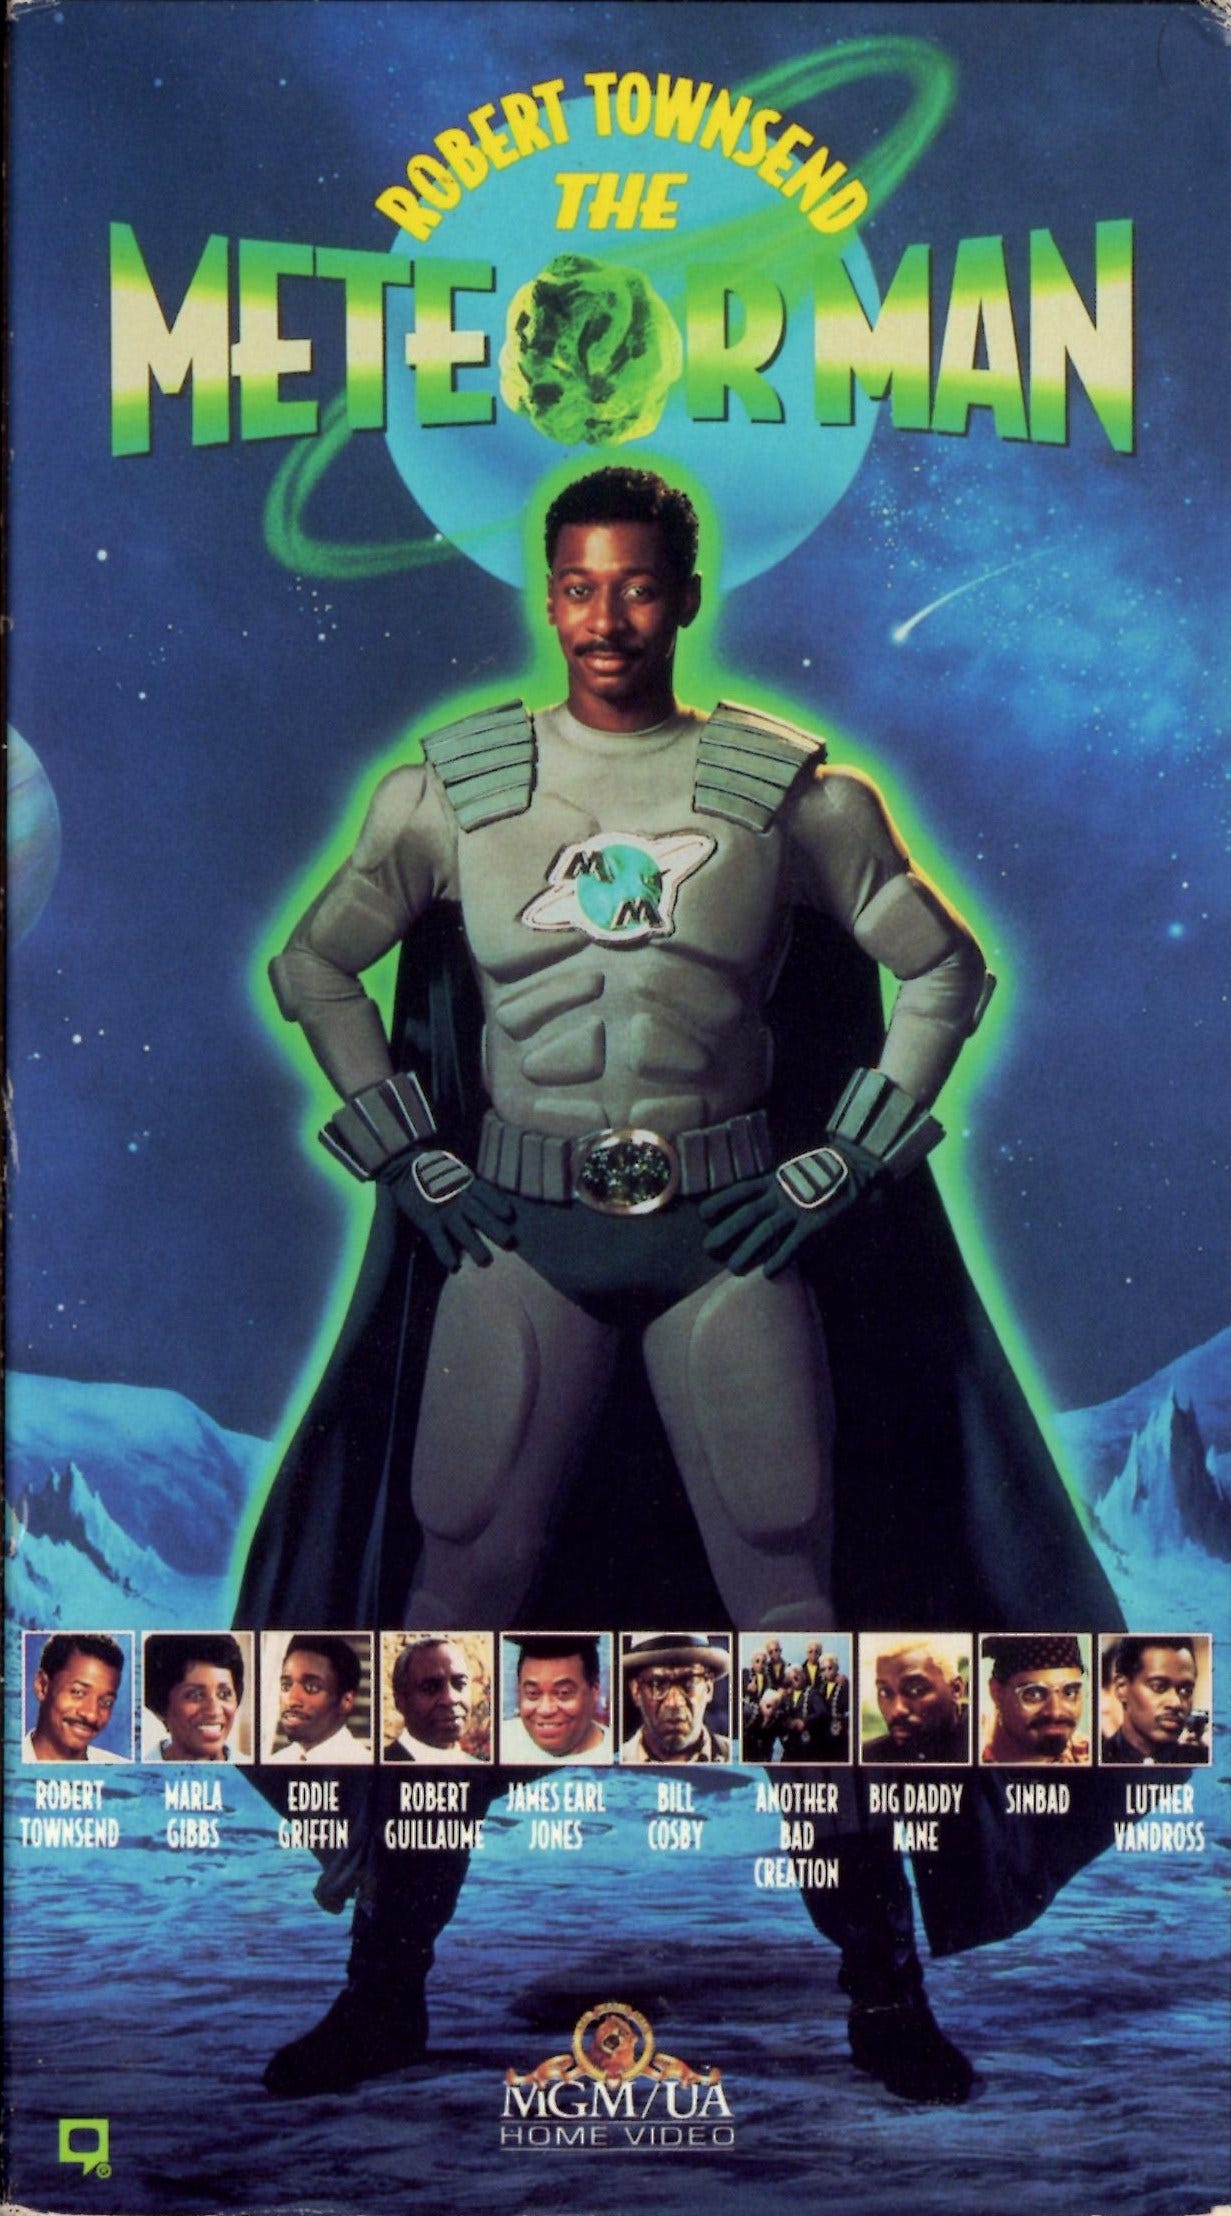 THE METEOR MAN Champions Conscience and Community, Is ...